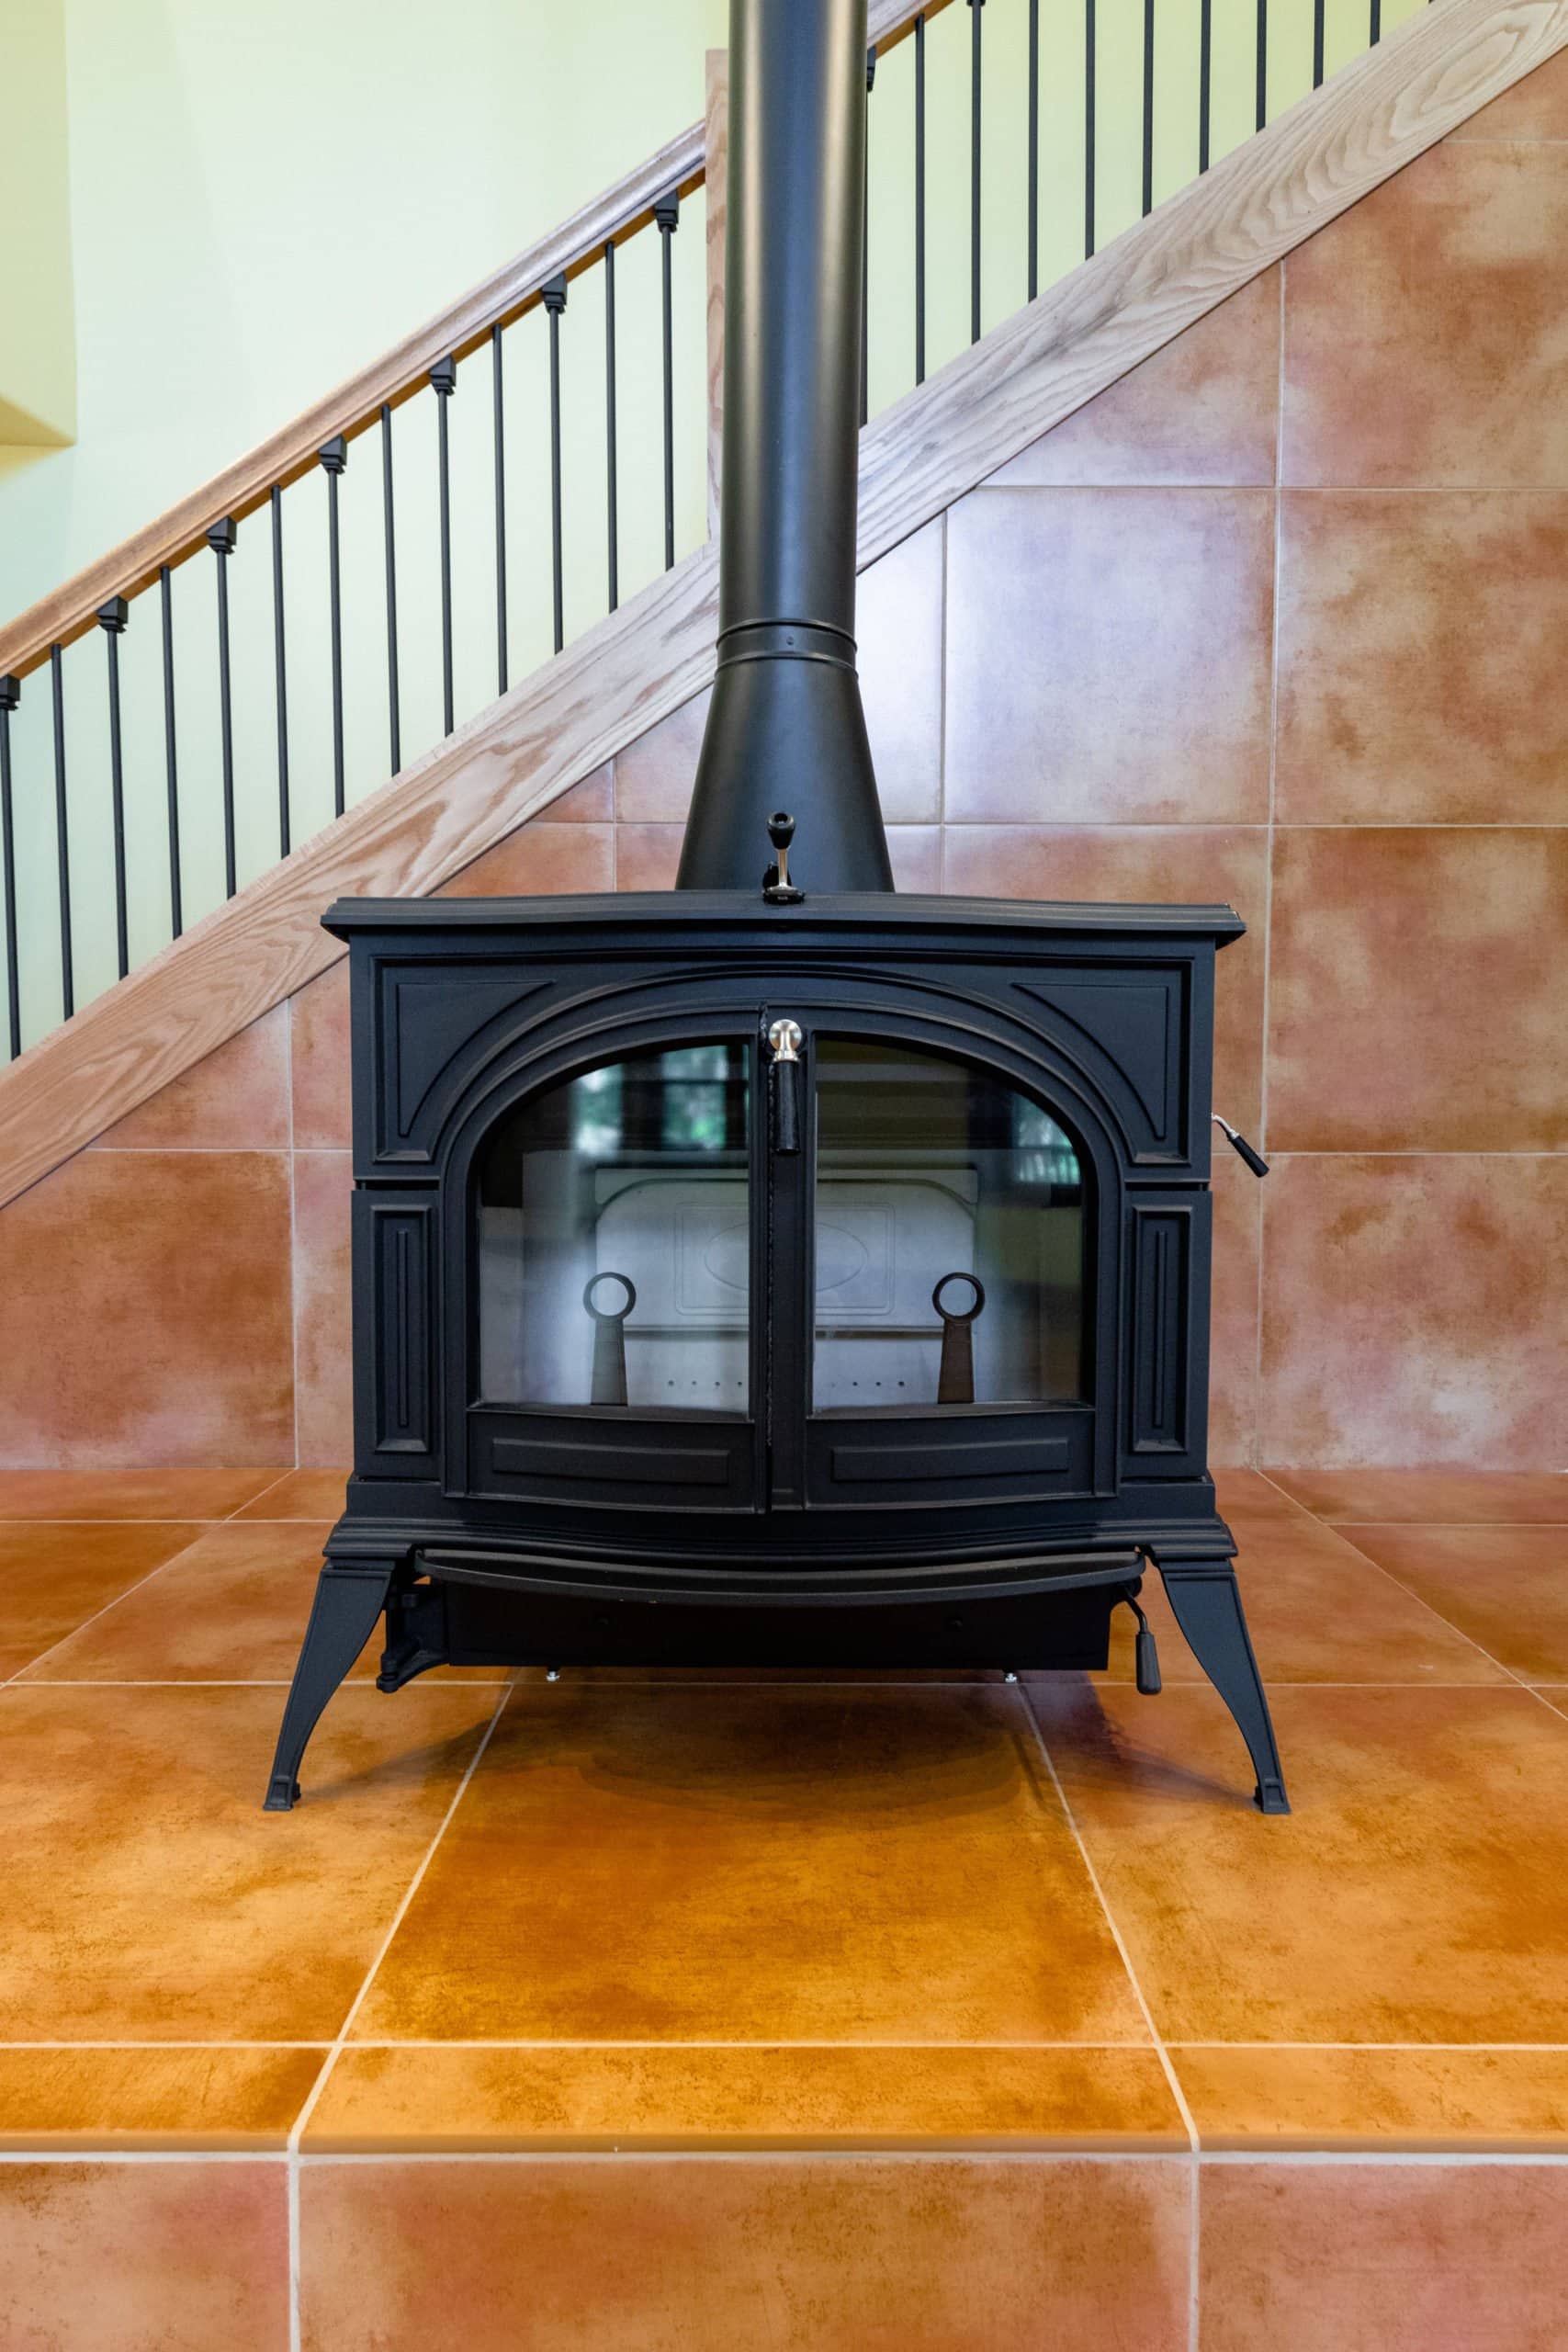 Interior home renovation - Fire place with tile and staircase in the background